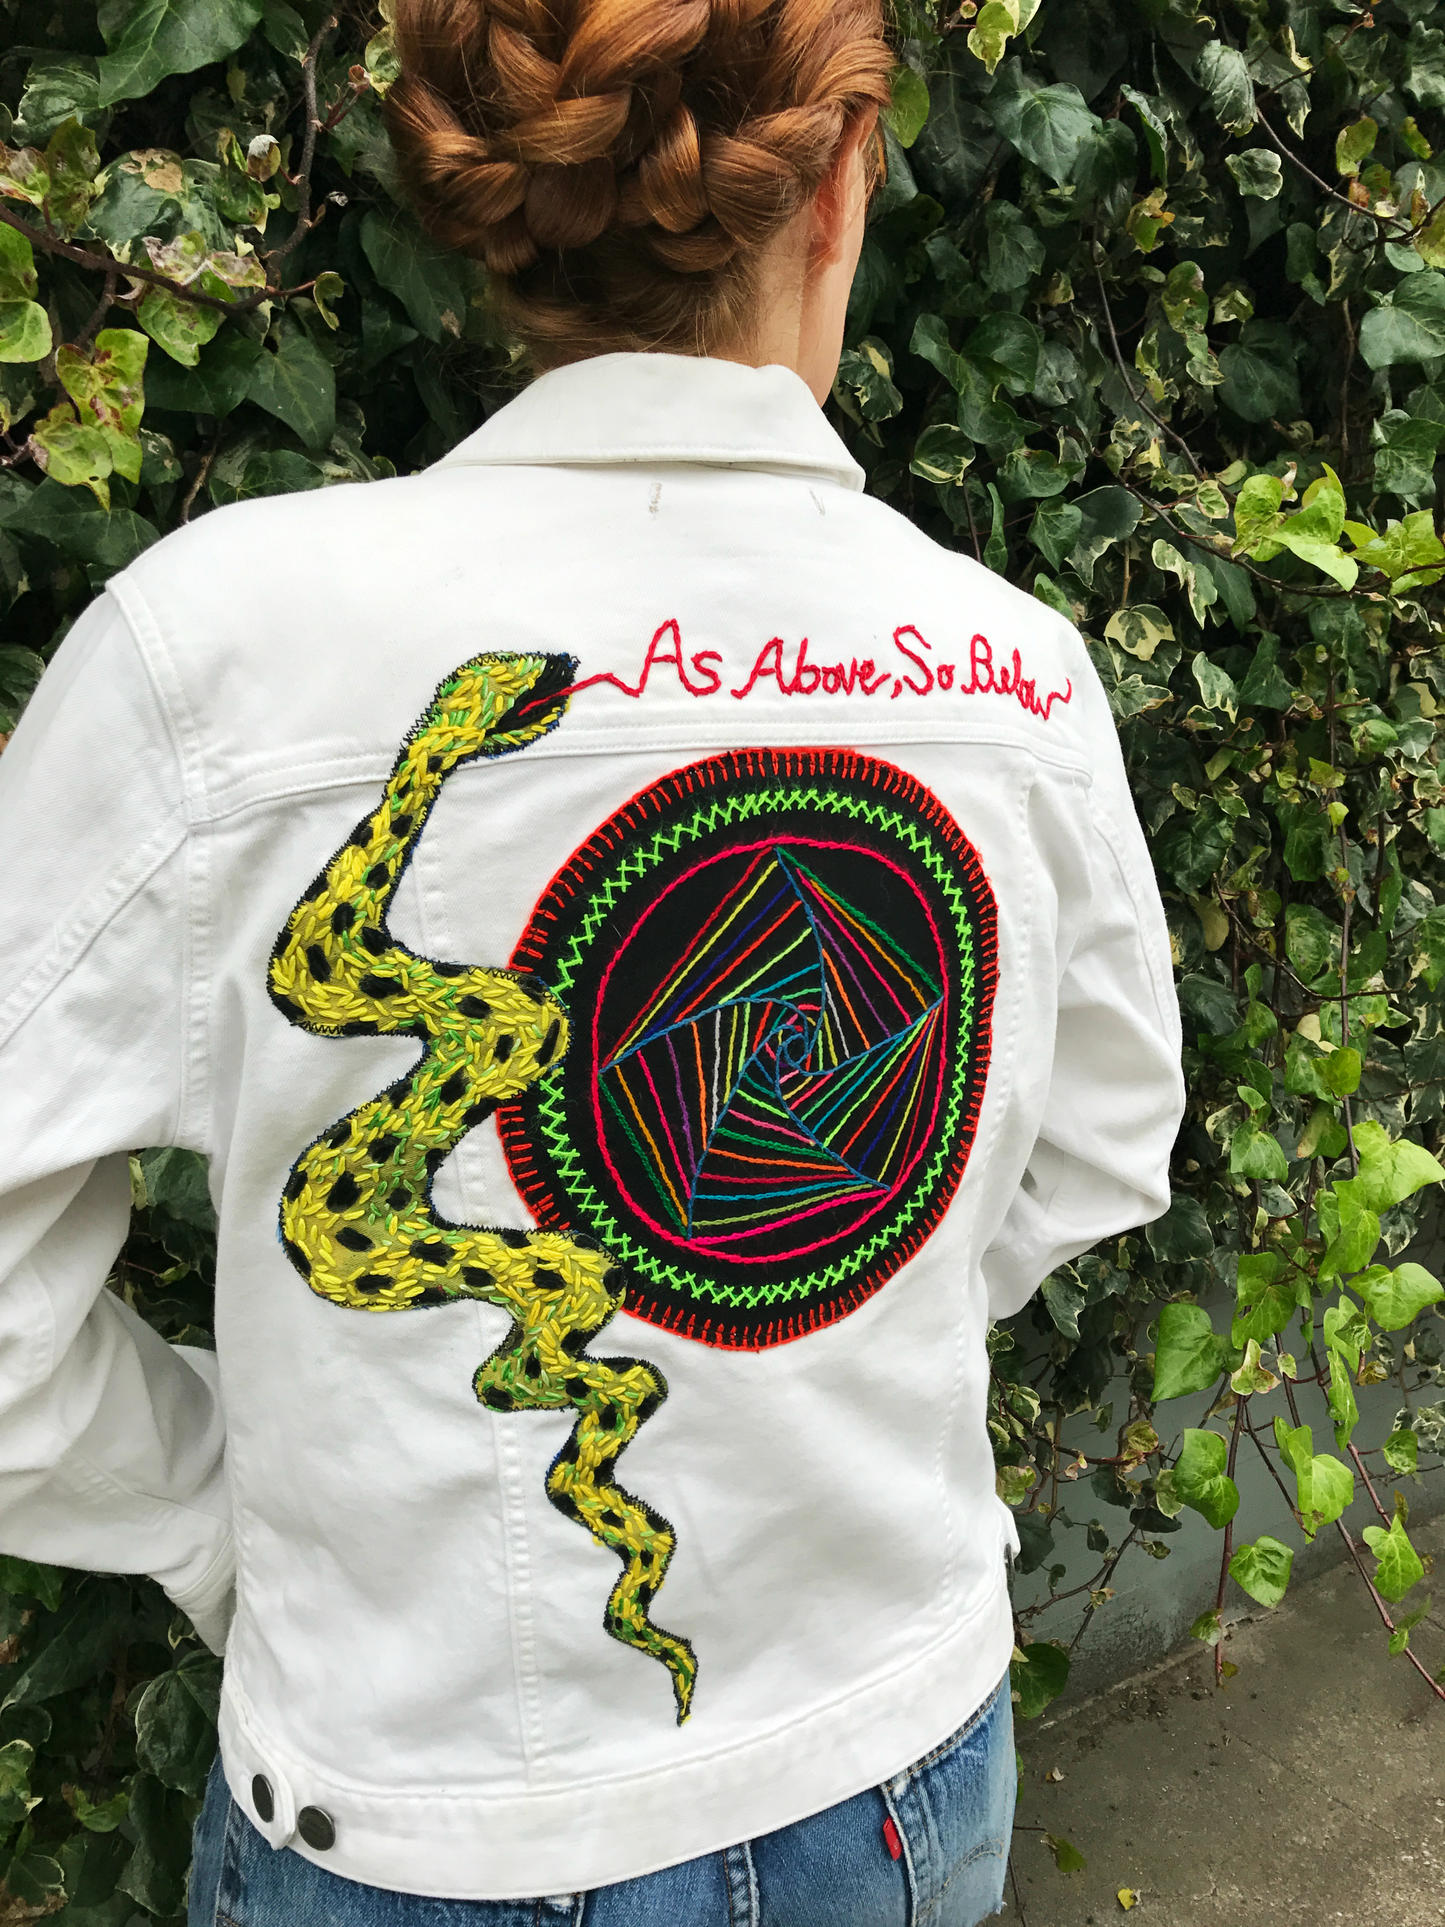 As Above, So Below Embroidered White Denim Jacket. Number 2